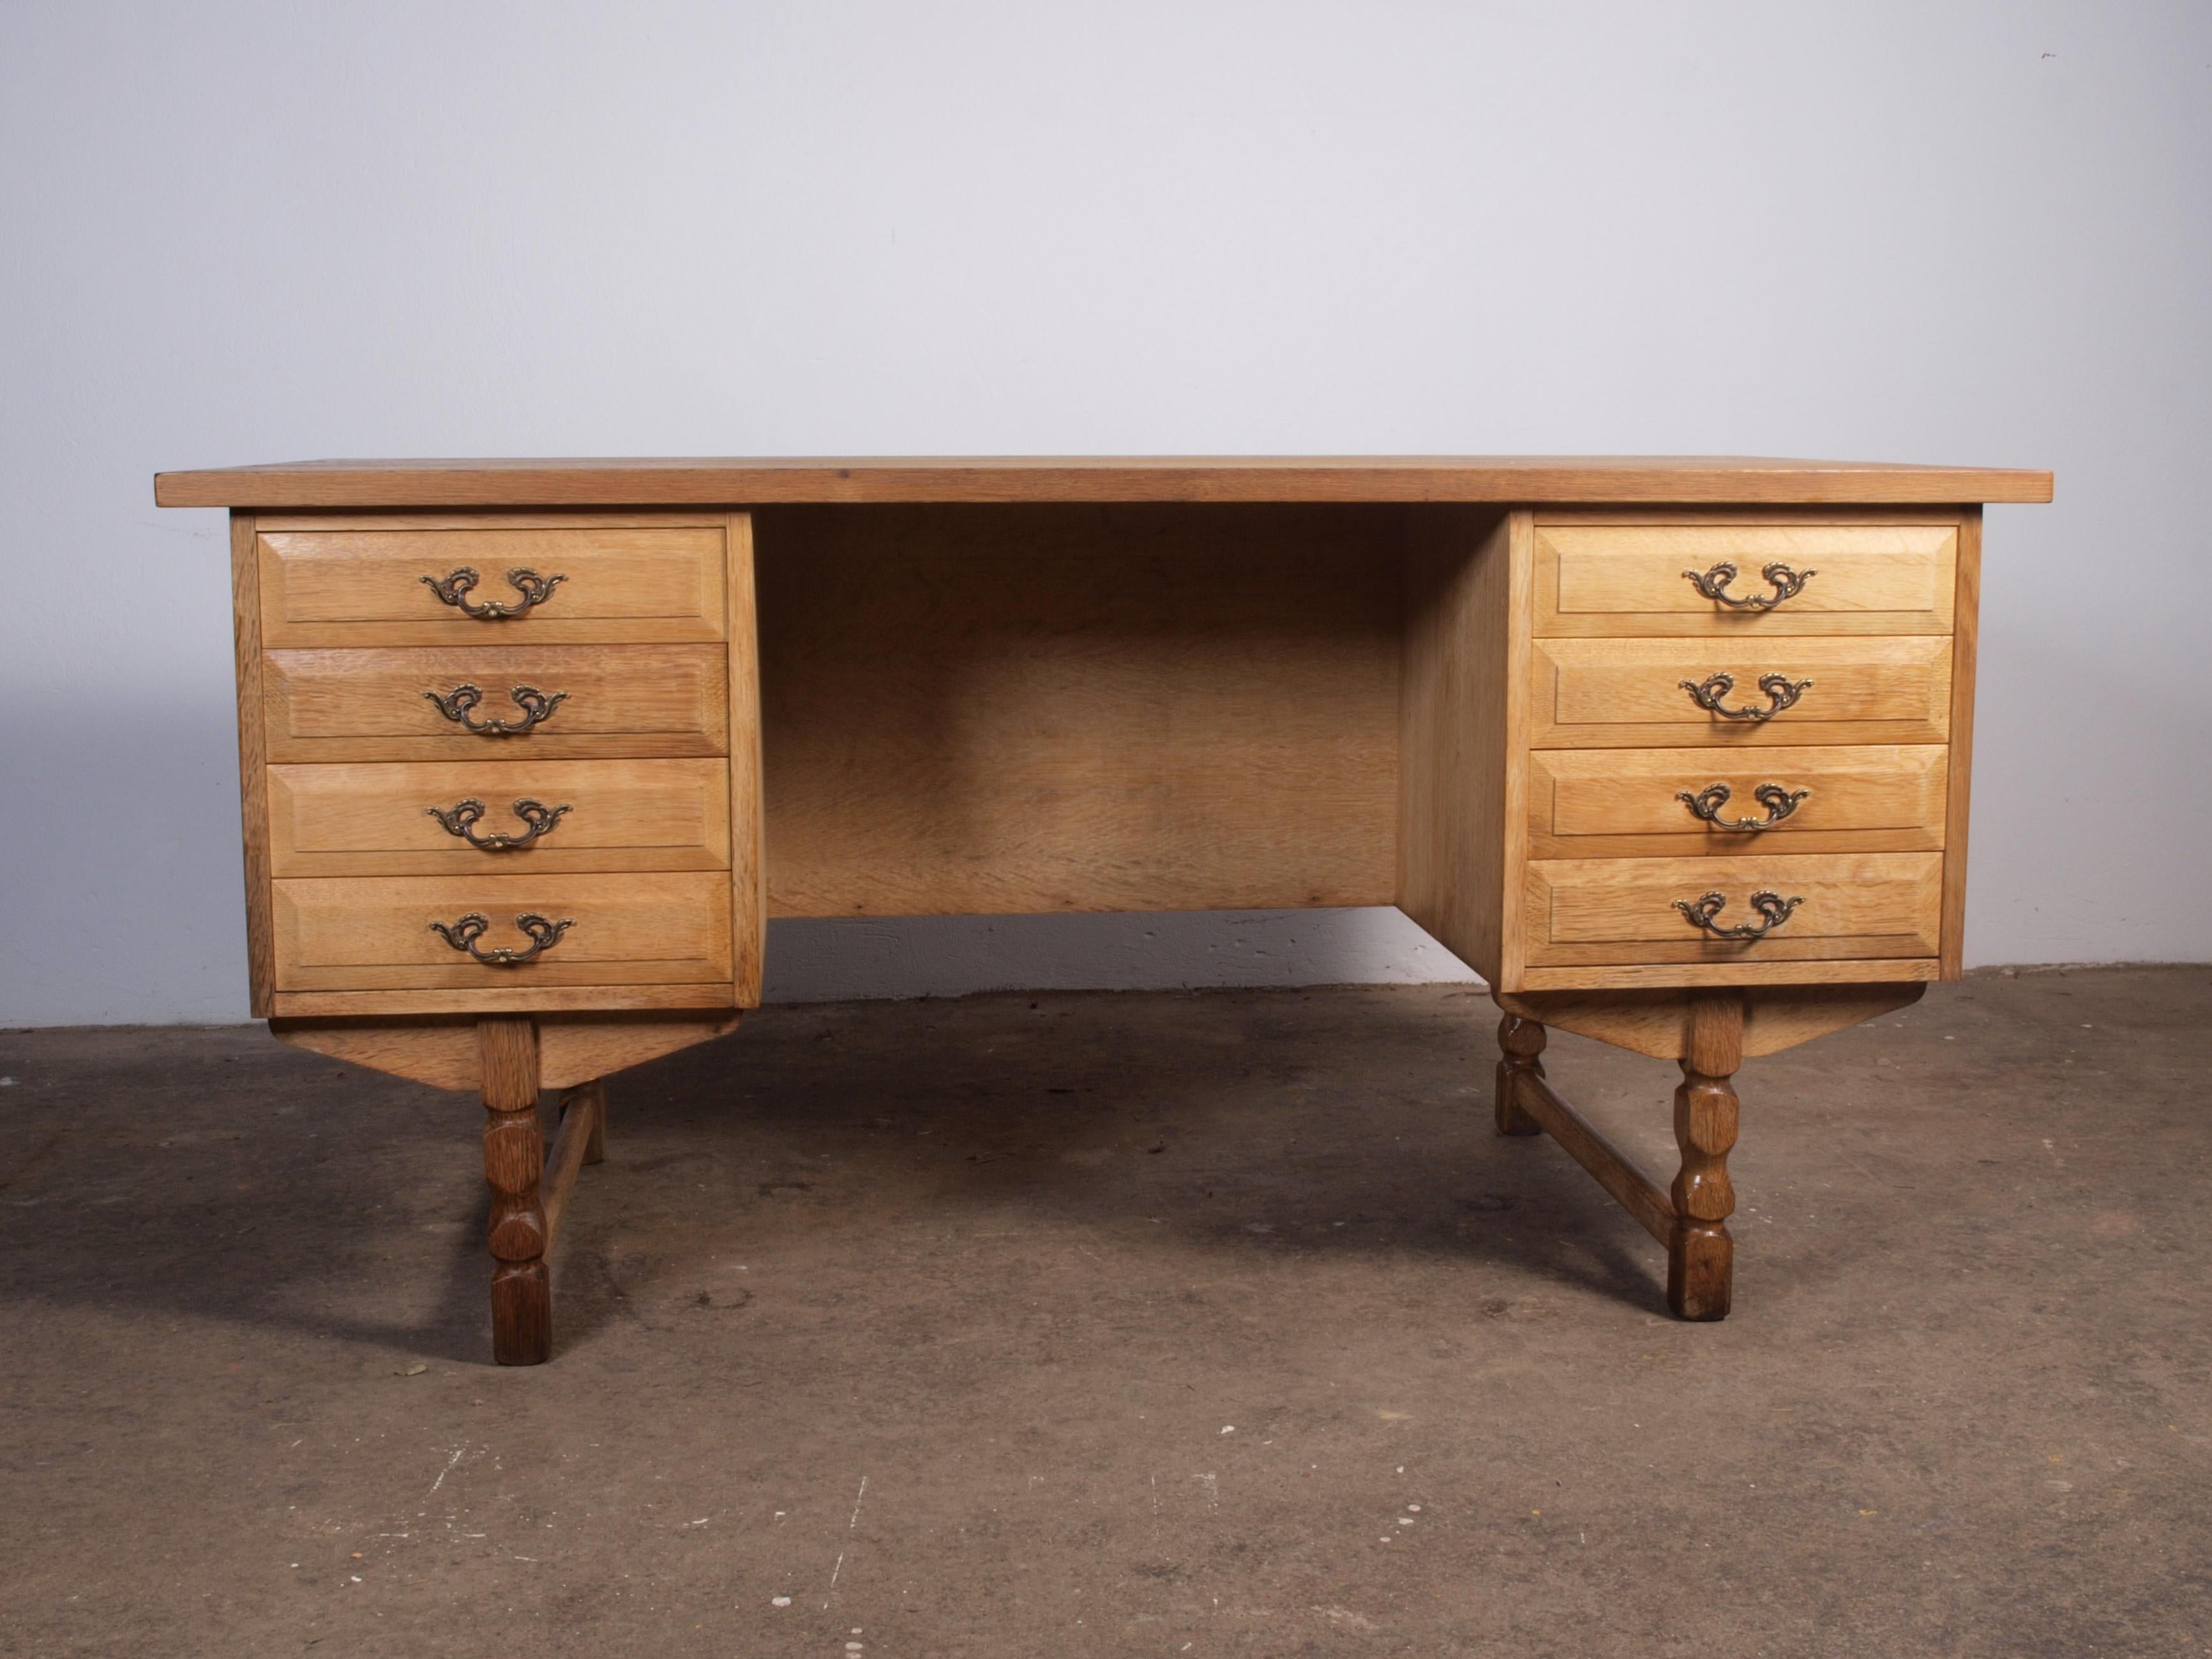 Solid oak writing desk complete with drawers, attributed to the Danish furniture designer Henning Henry Kjærnulf, a compelling piece. This creation harmoniously blends bold Baroque elements with the finesse of Mid-Century Modernism, resulting in a